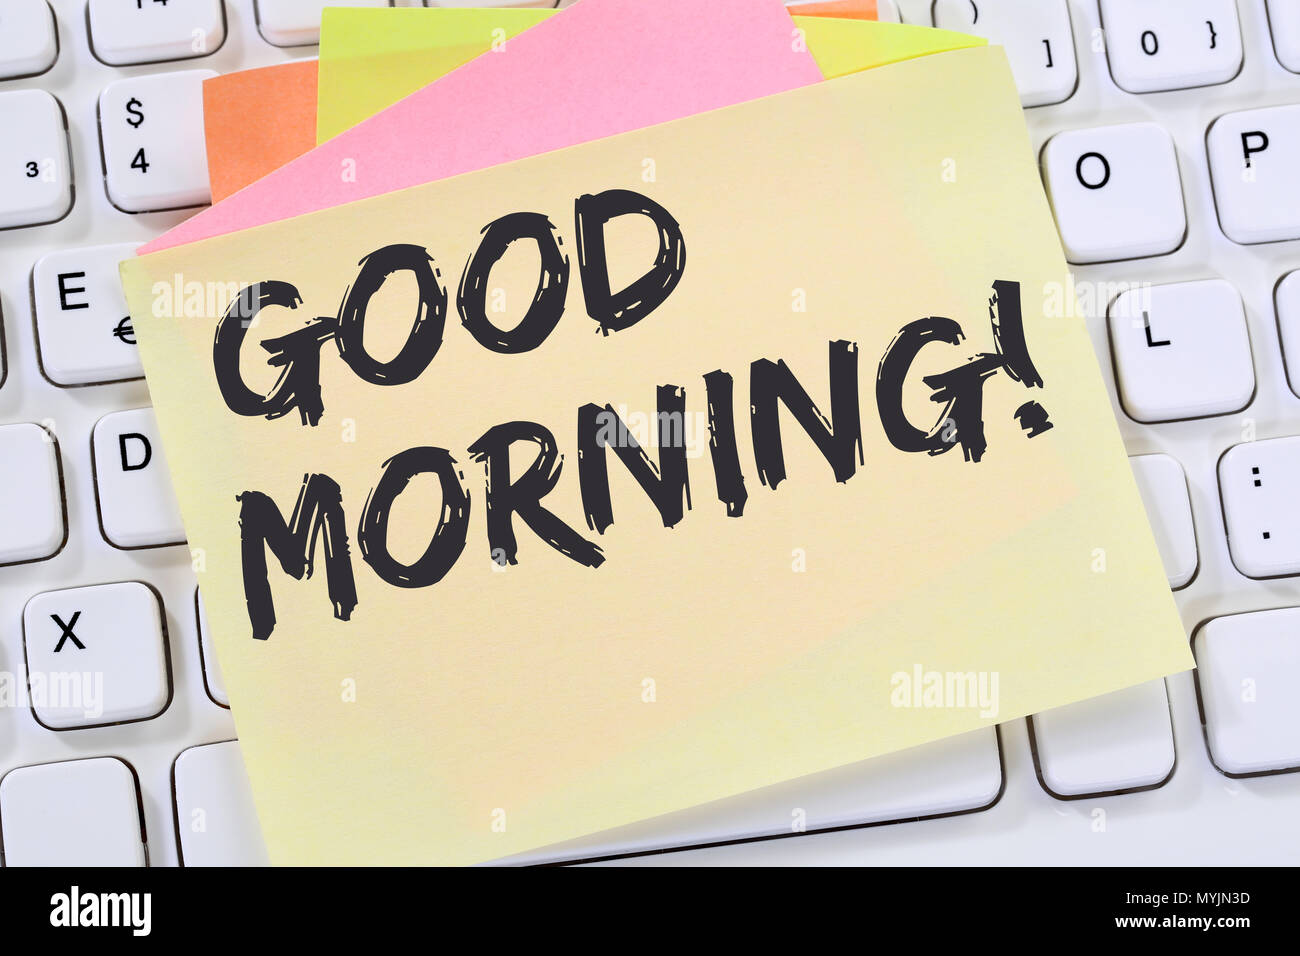 Good morning hello greeting welcome message business concept computer keyboard Stock Photo